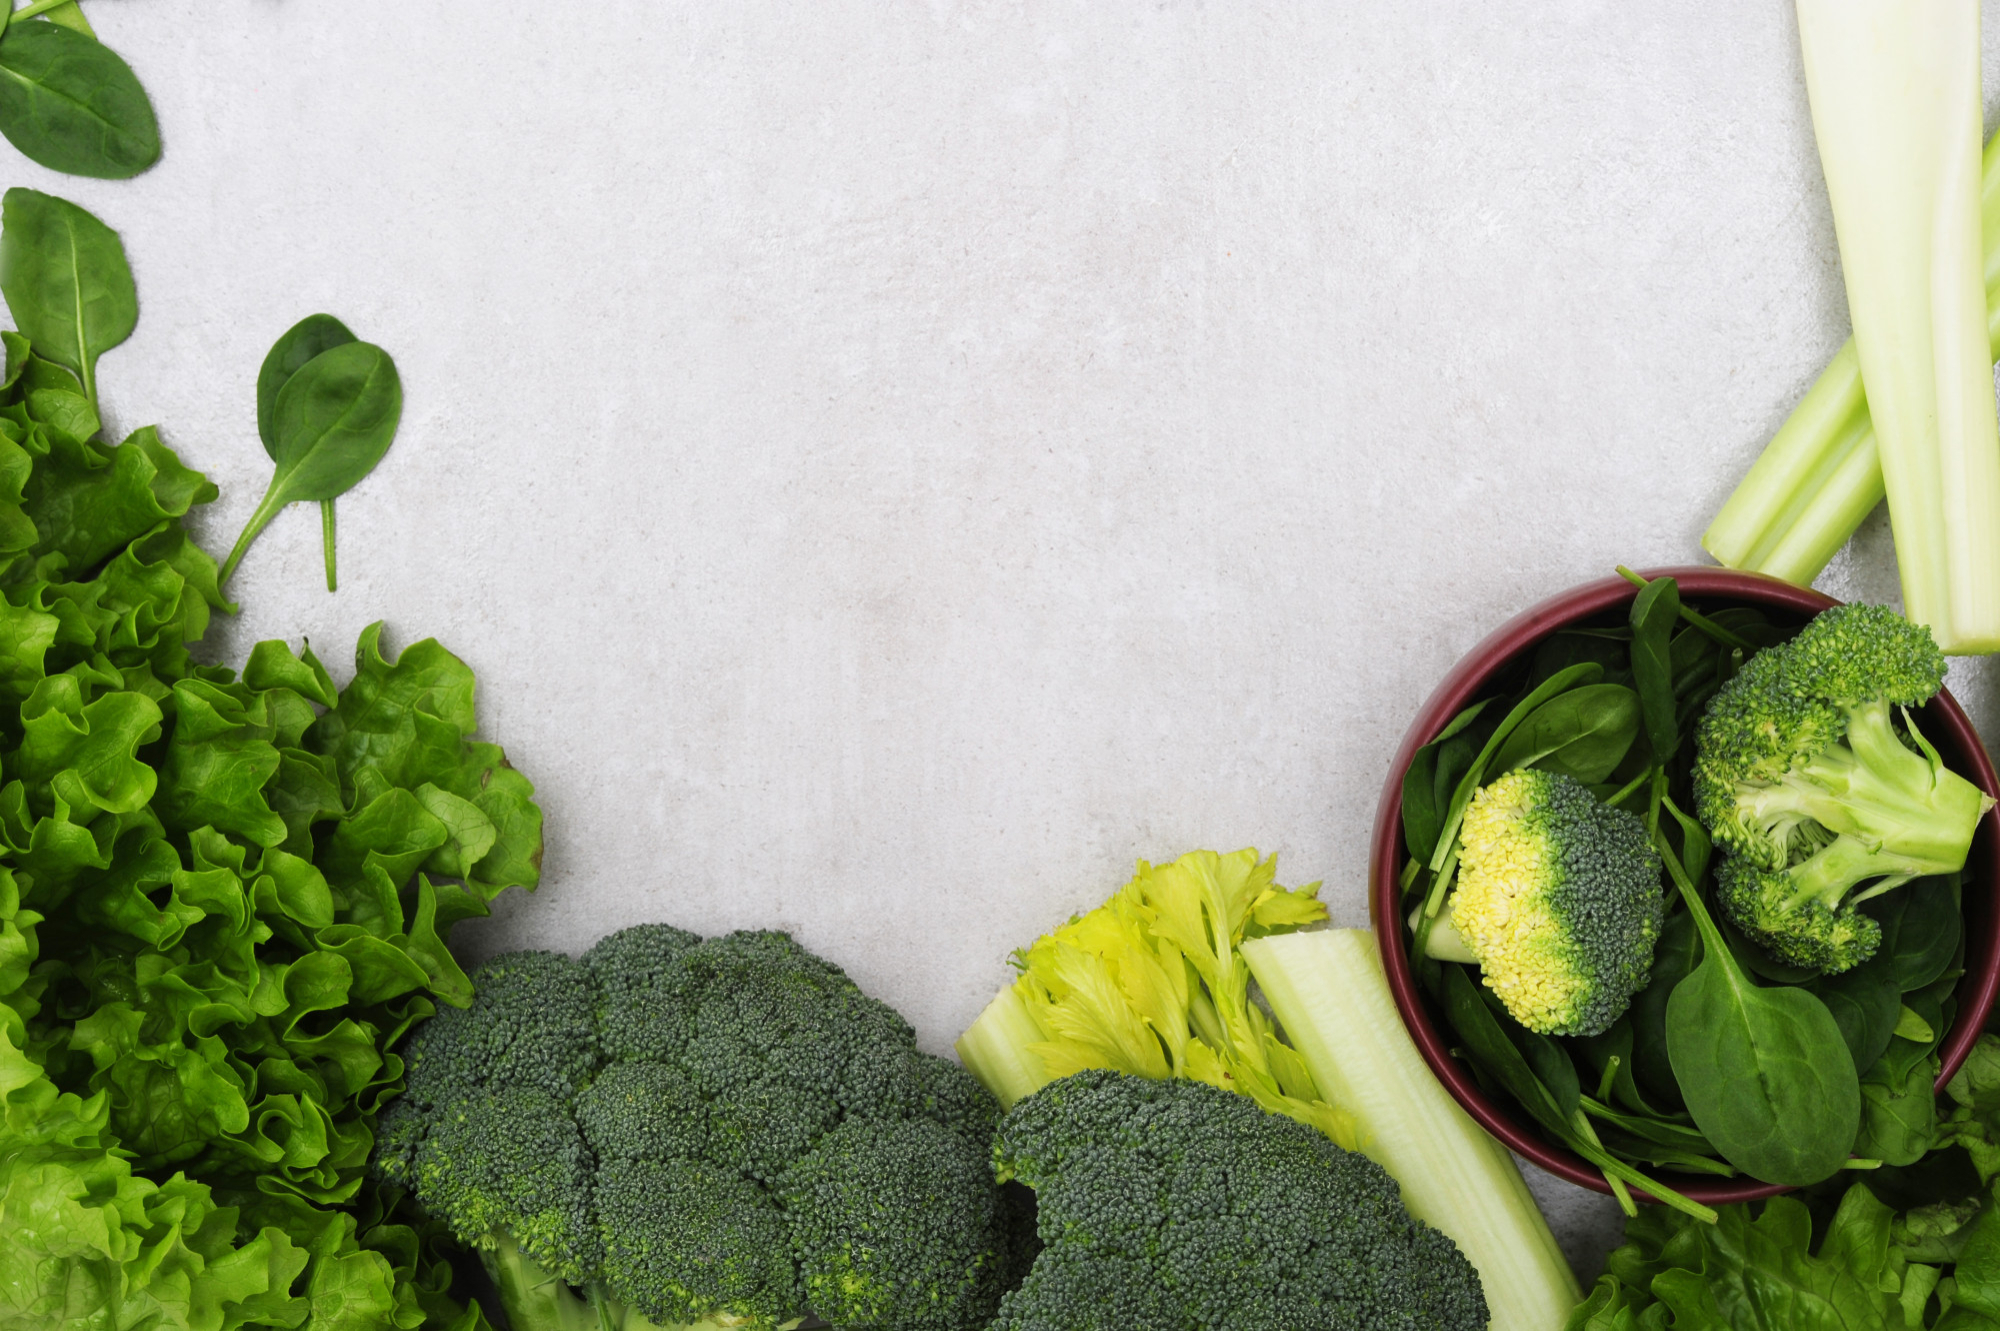 Folic acid from greens may prevent colon cancer